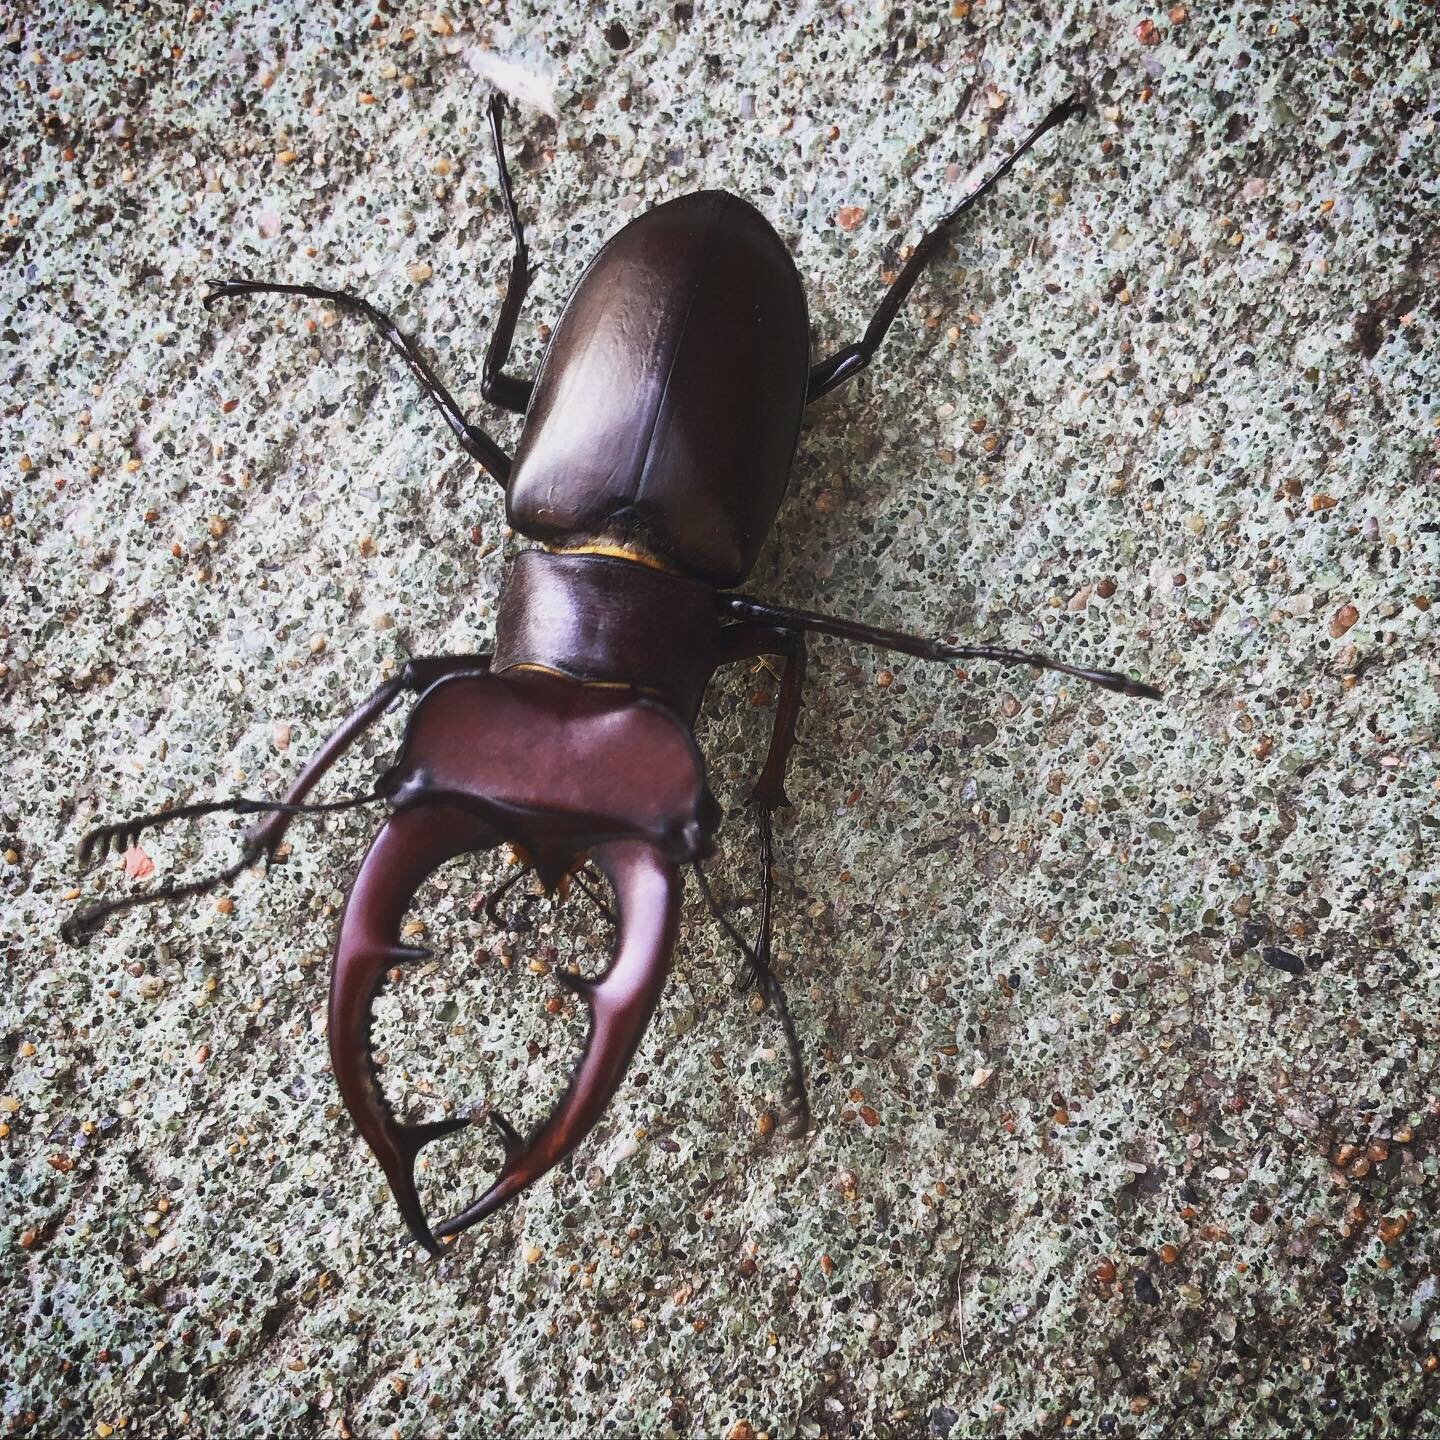 ✨signs✨signs✨everywhere signs✨

I ran into this beetle yesterday morning and was in equal parts in awe and fear of this creature. I took a picture (obvi) and then attempted to move it into grass using a piece of mulch 😁 - it worked out eventually - 